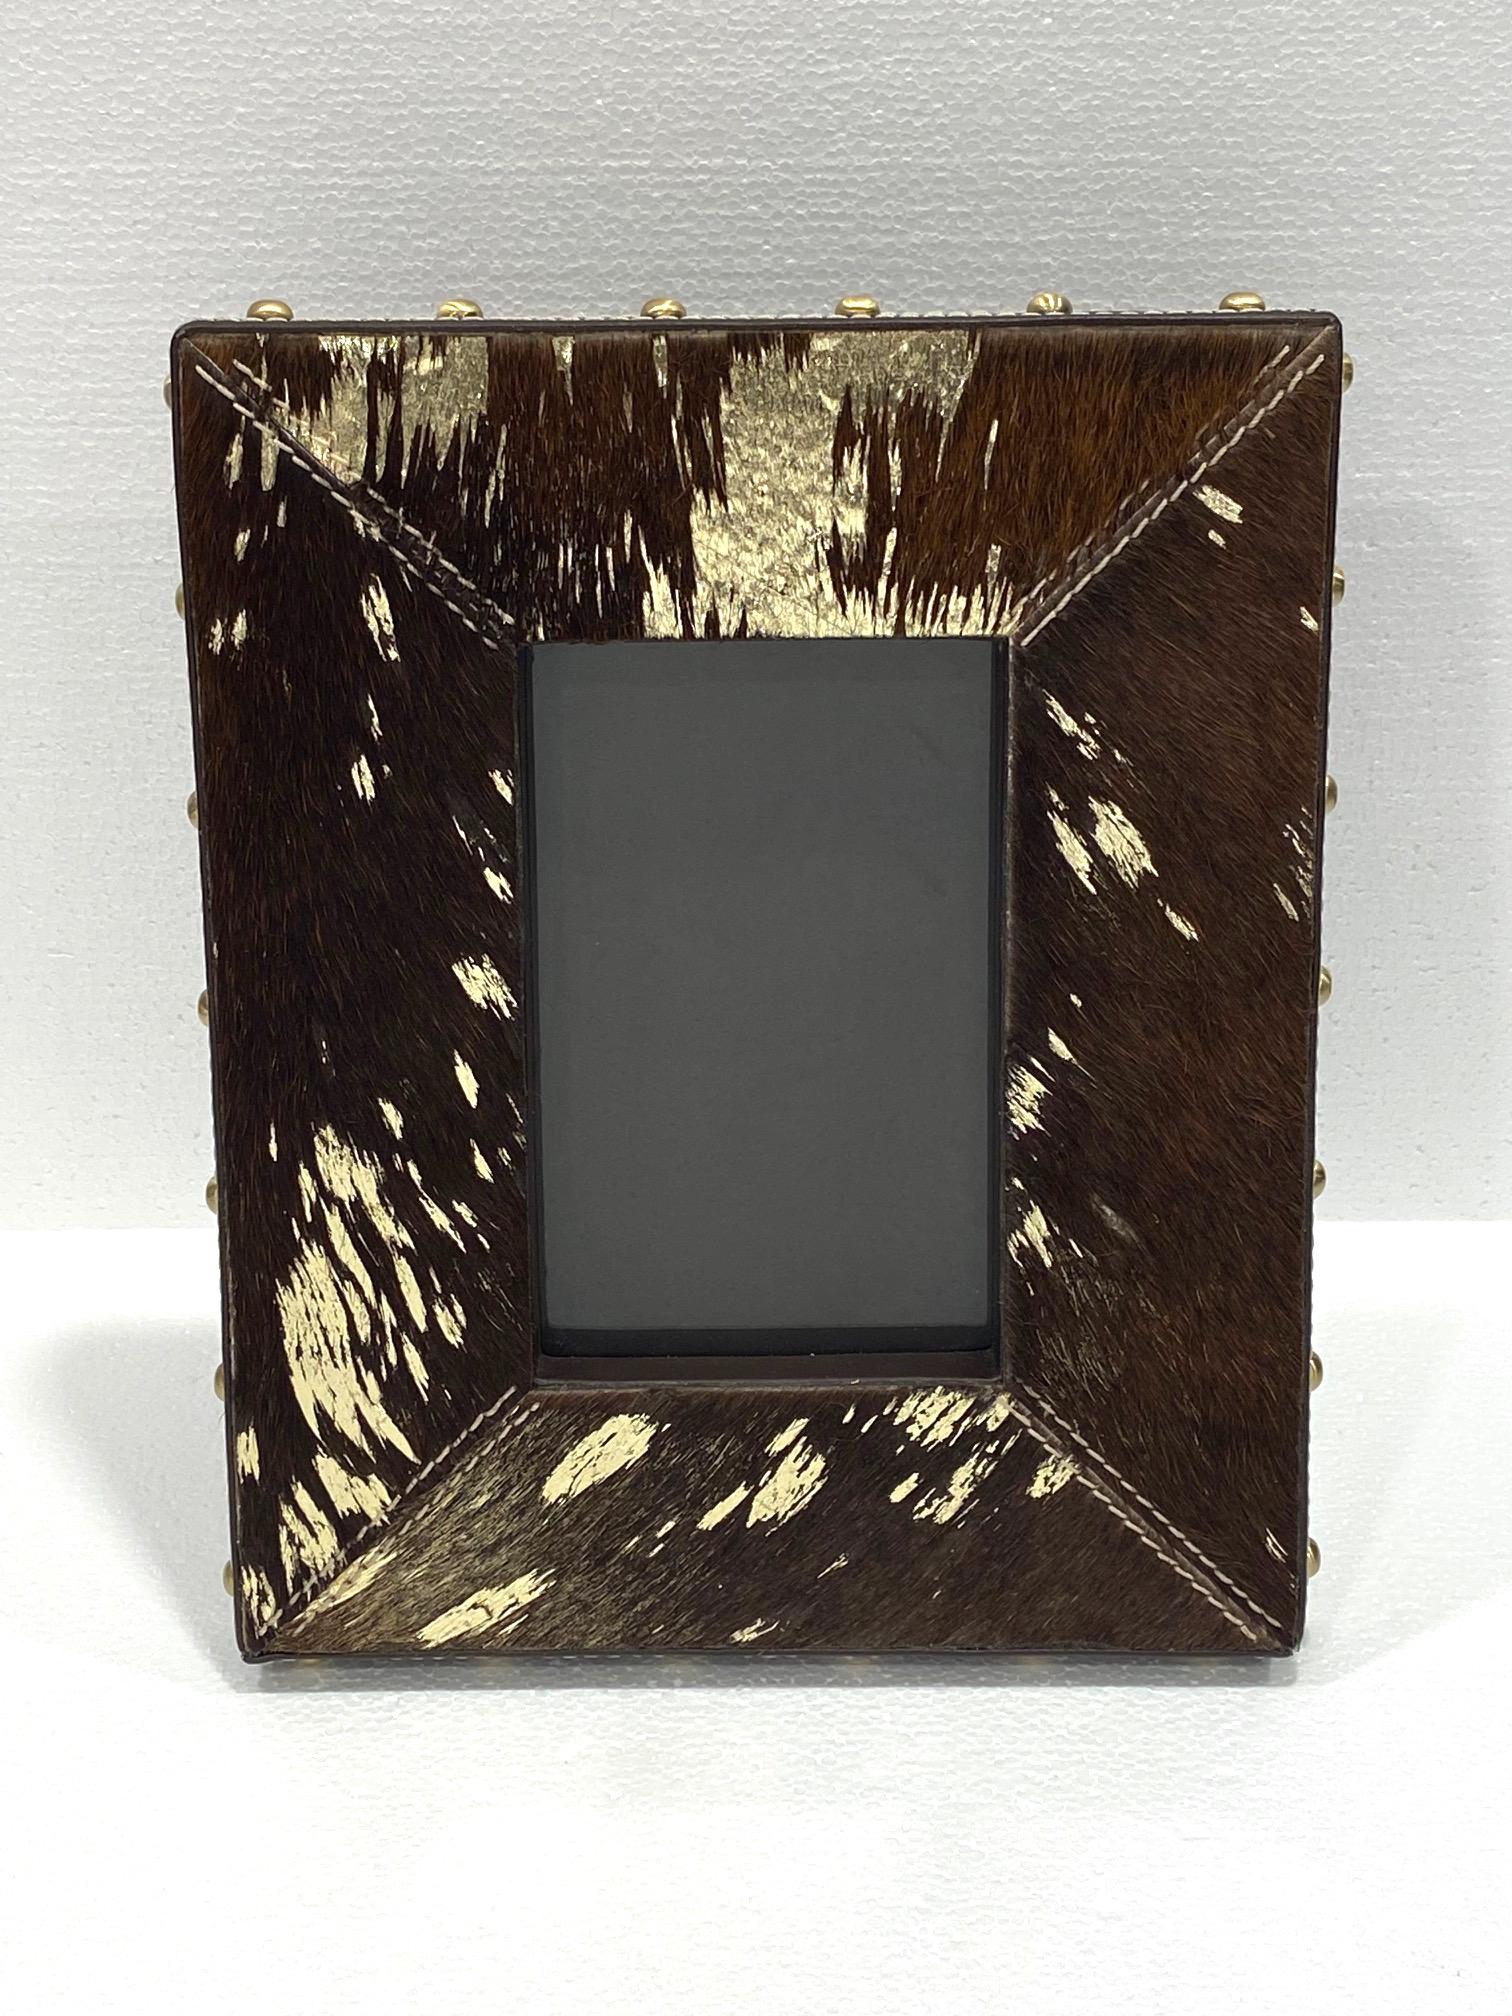 Rustic Hollywood Regency photo frame in dark brown cowhide with gold metallic foil accents. Handcrafted with brown leather trim and brass studs along the borders. Frame features handstitched details and holds 4